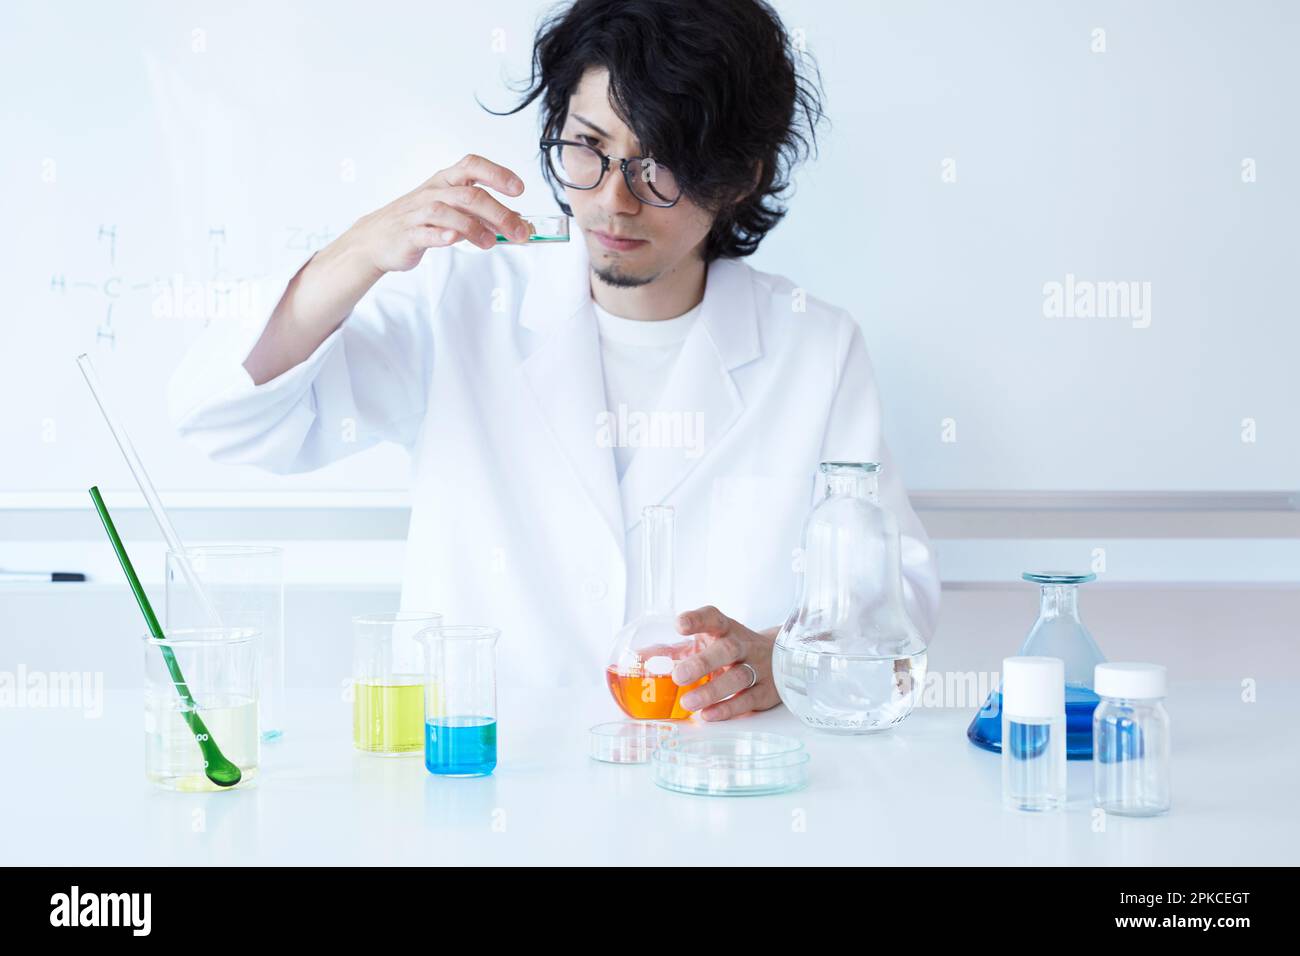 Man experimenting with colored liquid Stock Photo